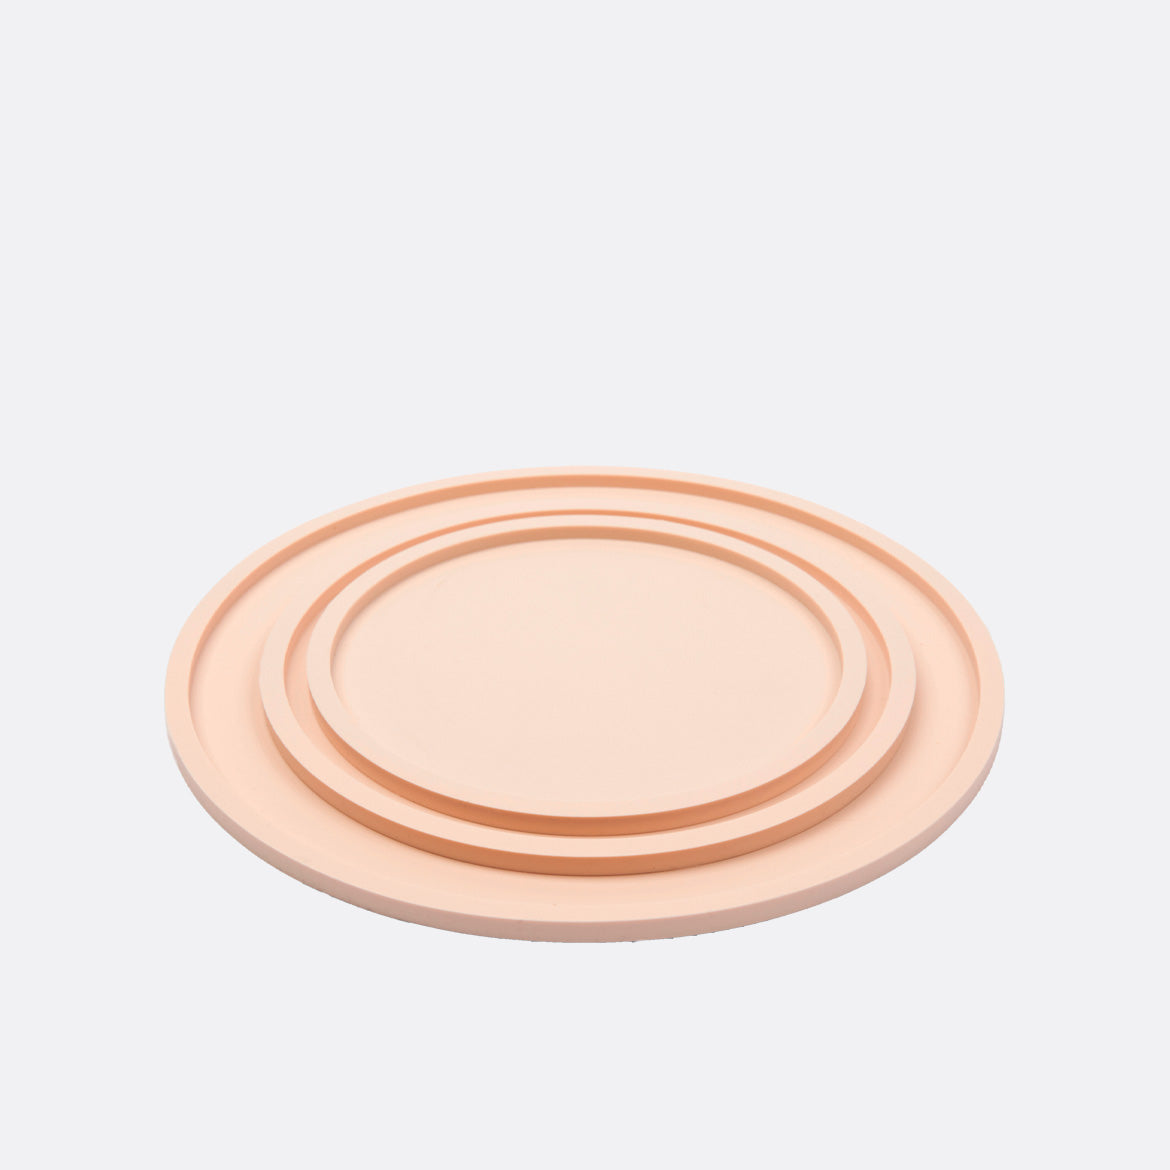 Habit Circle Non-slip Silicon Dog Bowl Placemat 3 sizes by Waggo in pink